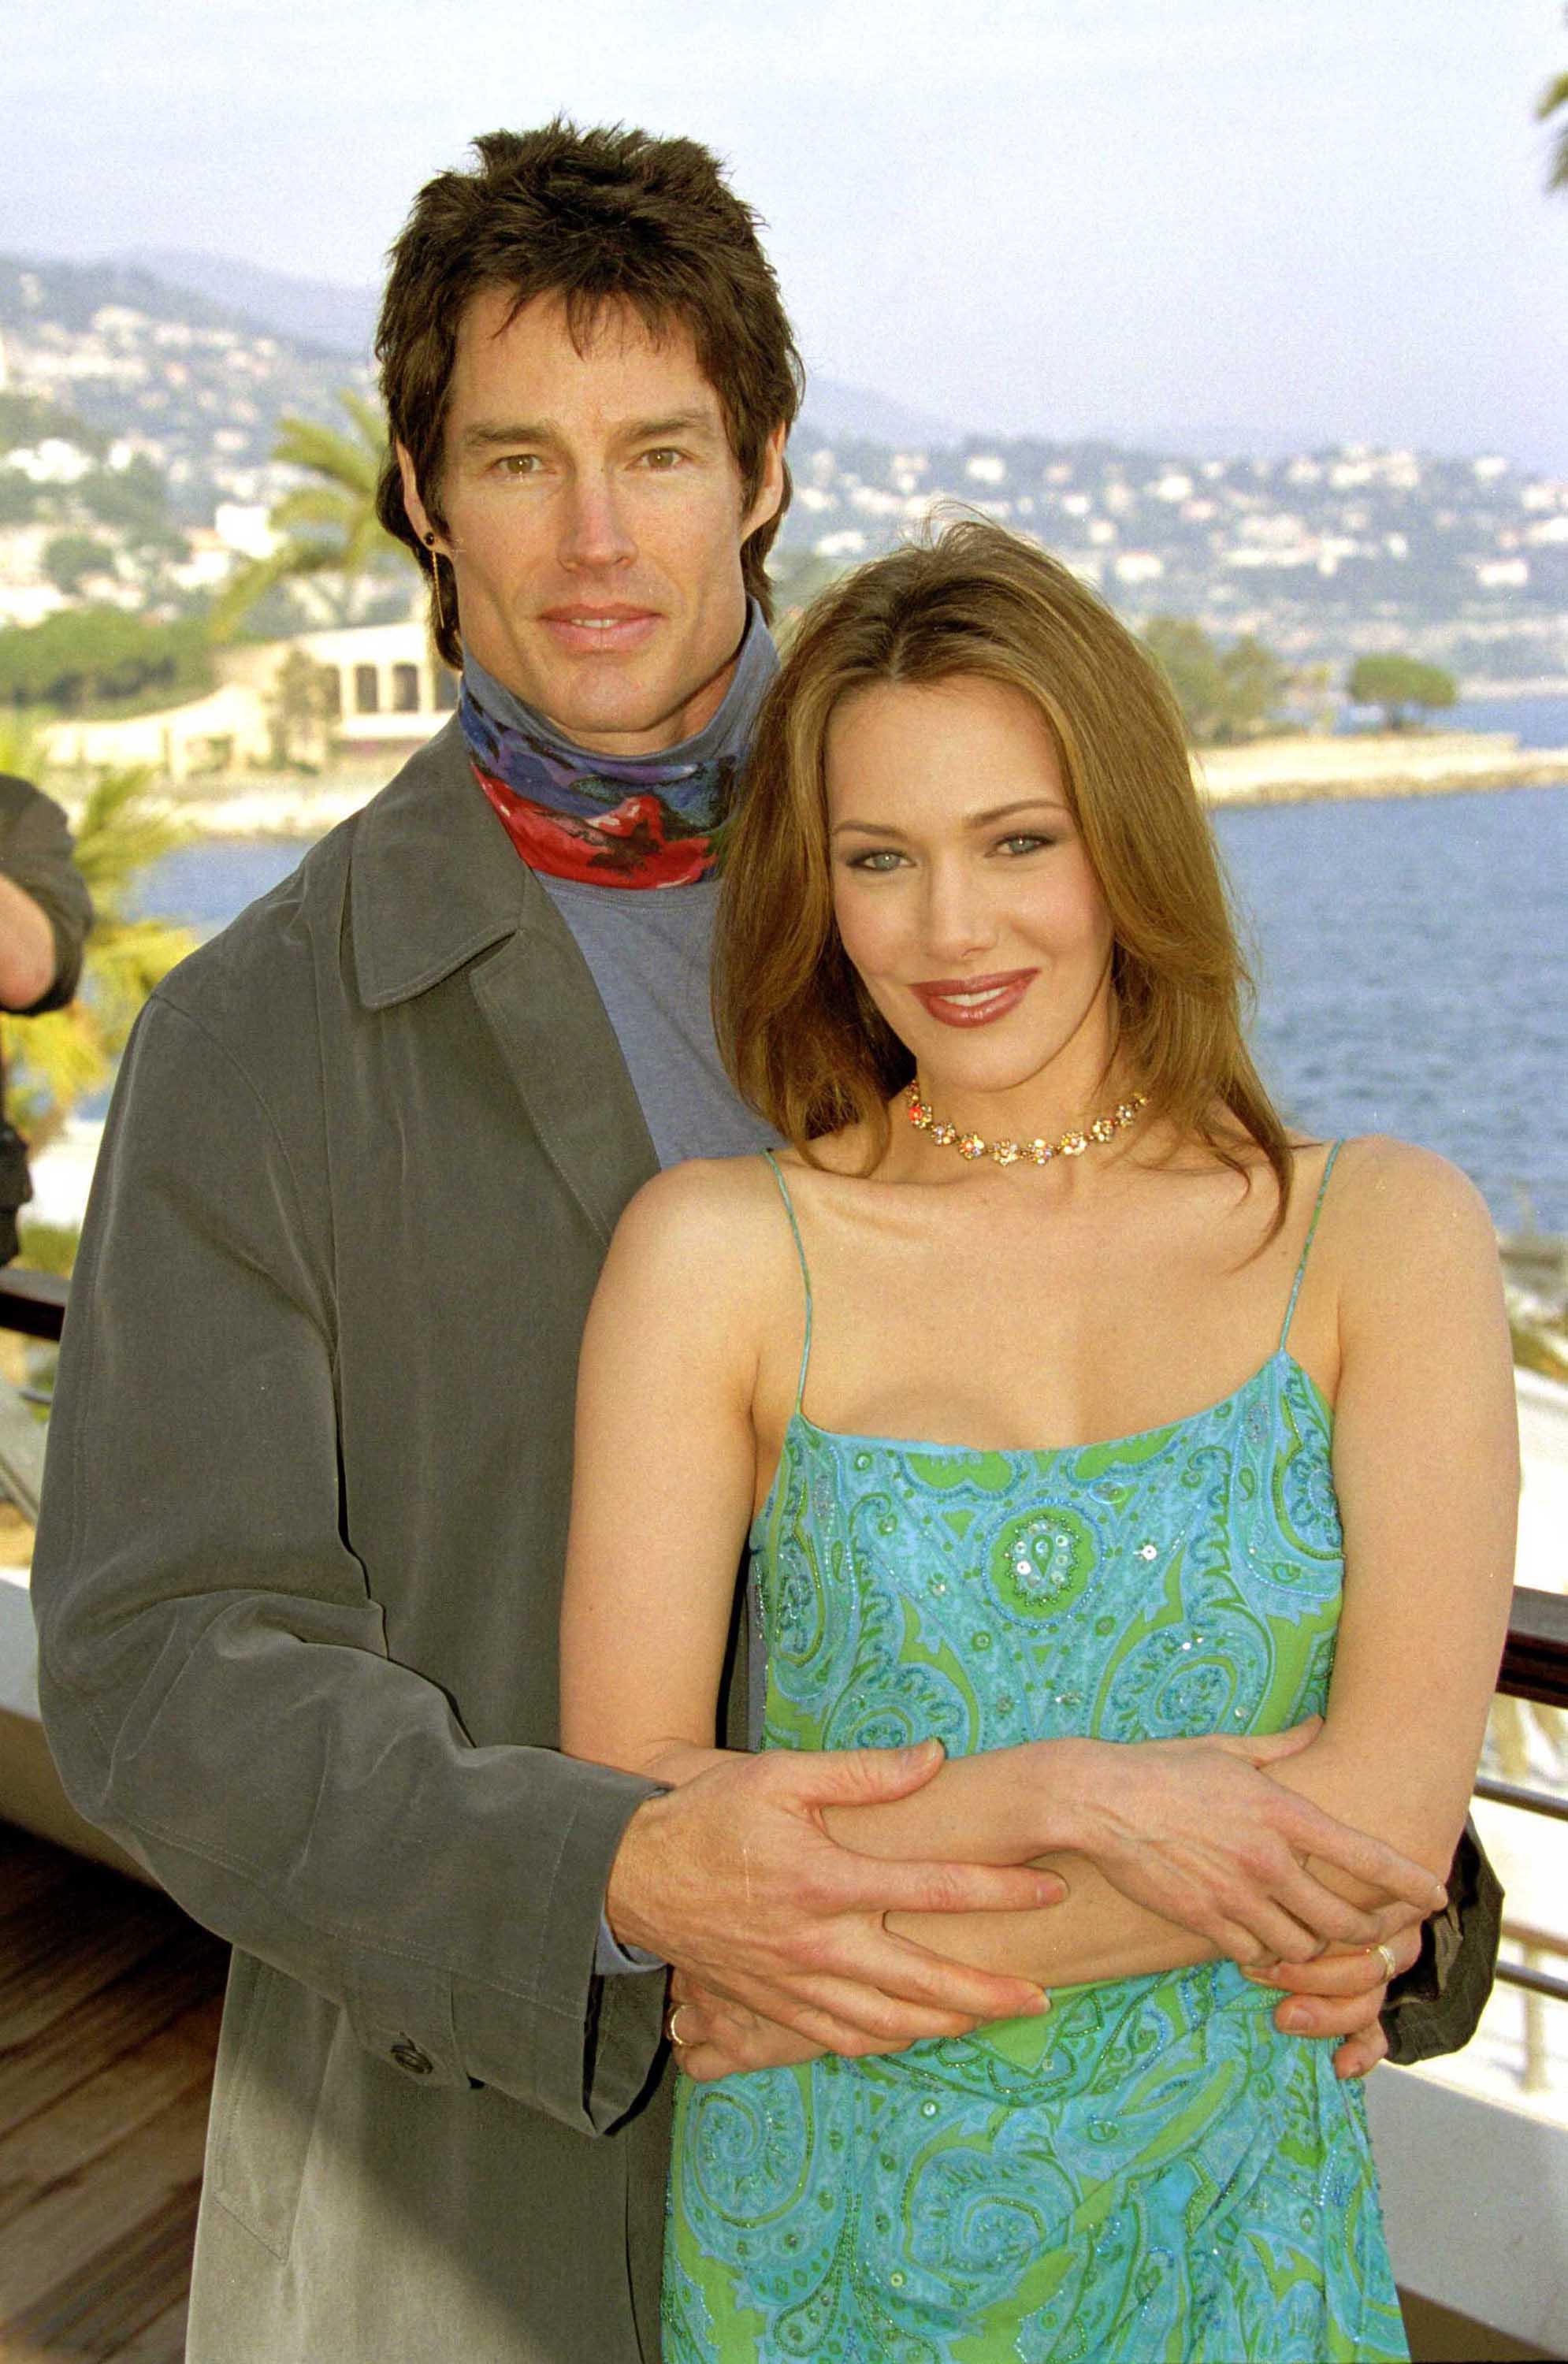 The Bold and the Beautiful': Hunter Tylo's Claims of an Affair With Co-Star  Ronn Moss